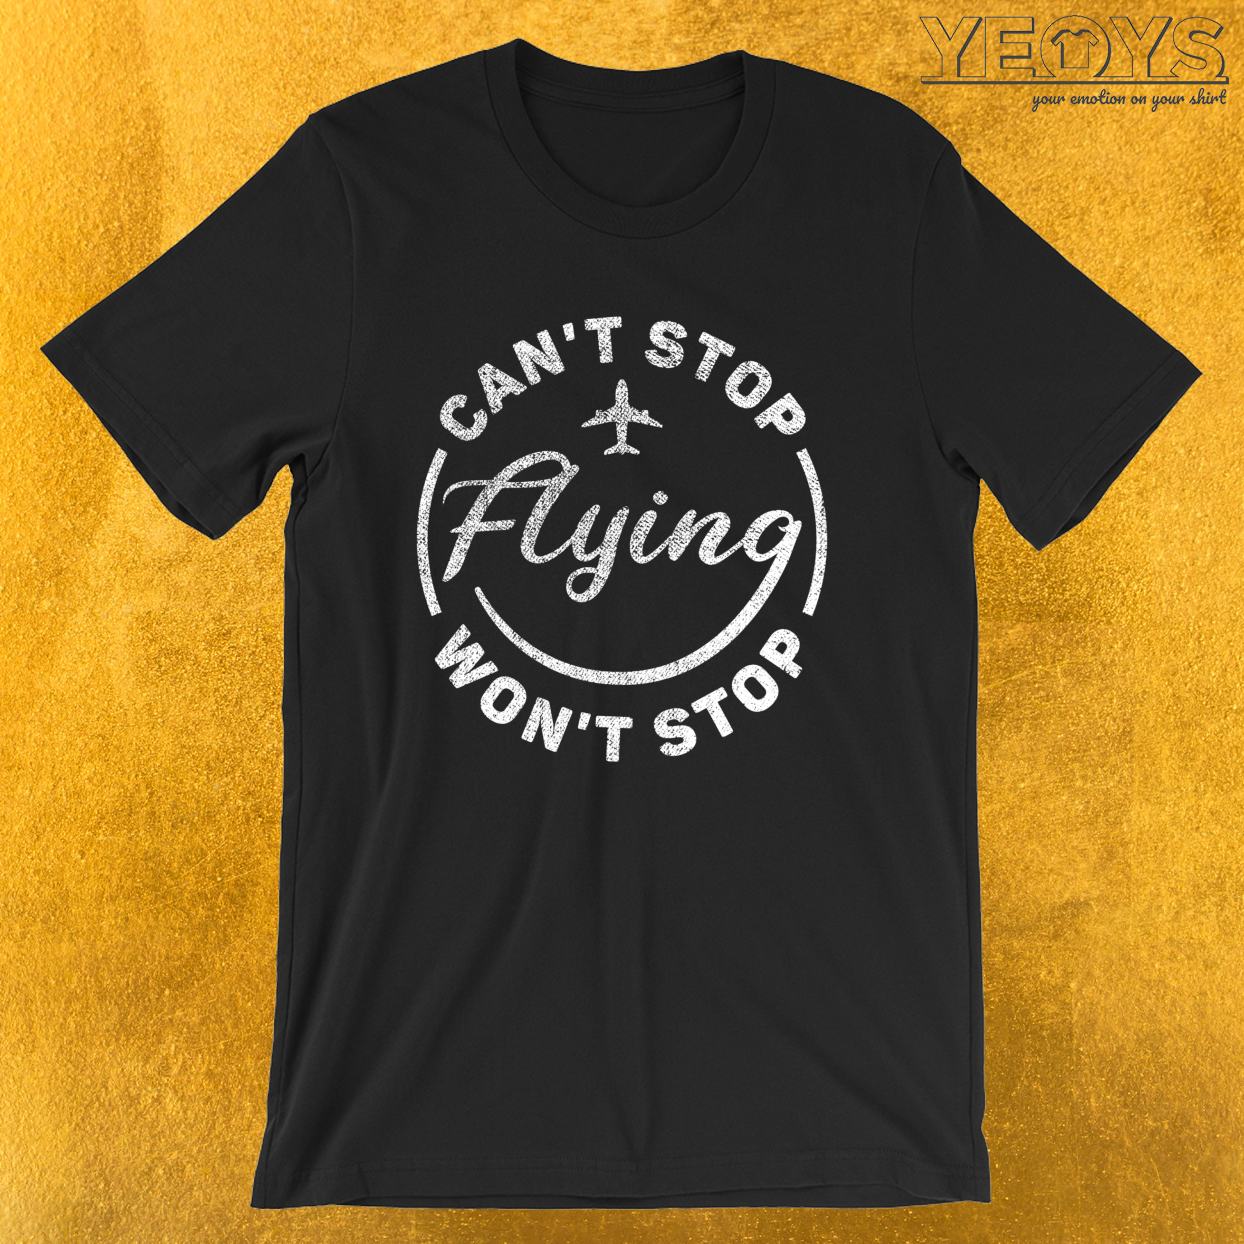 Can’t Stop Won’t Stop Flying – Aviation Quote Tee